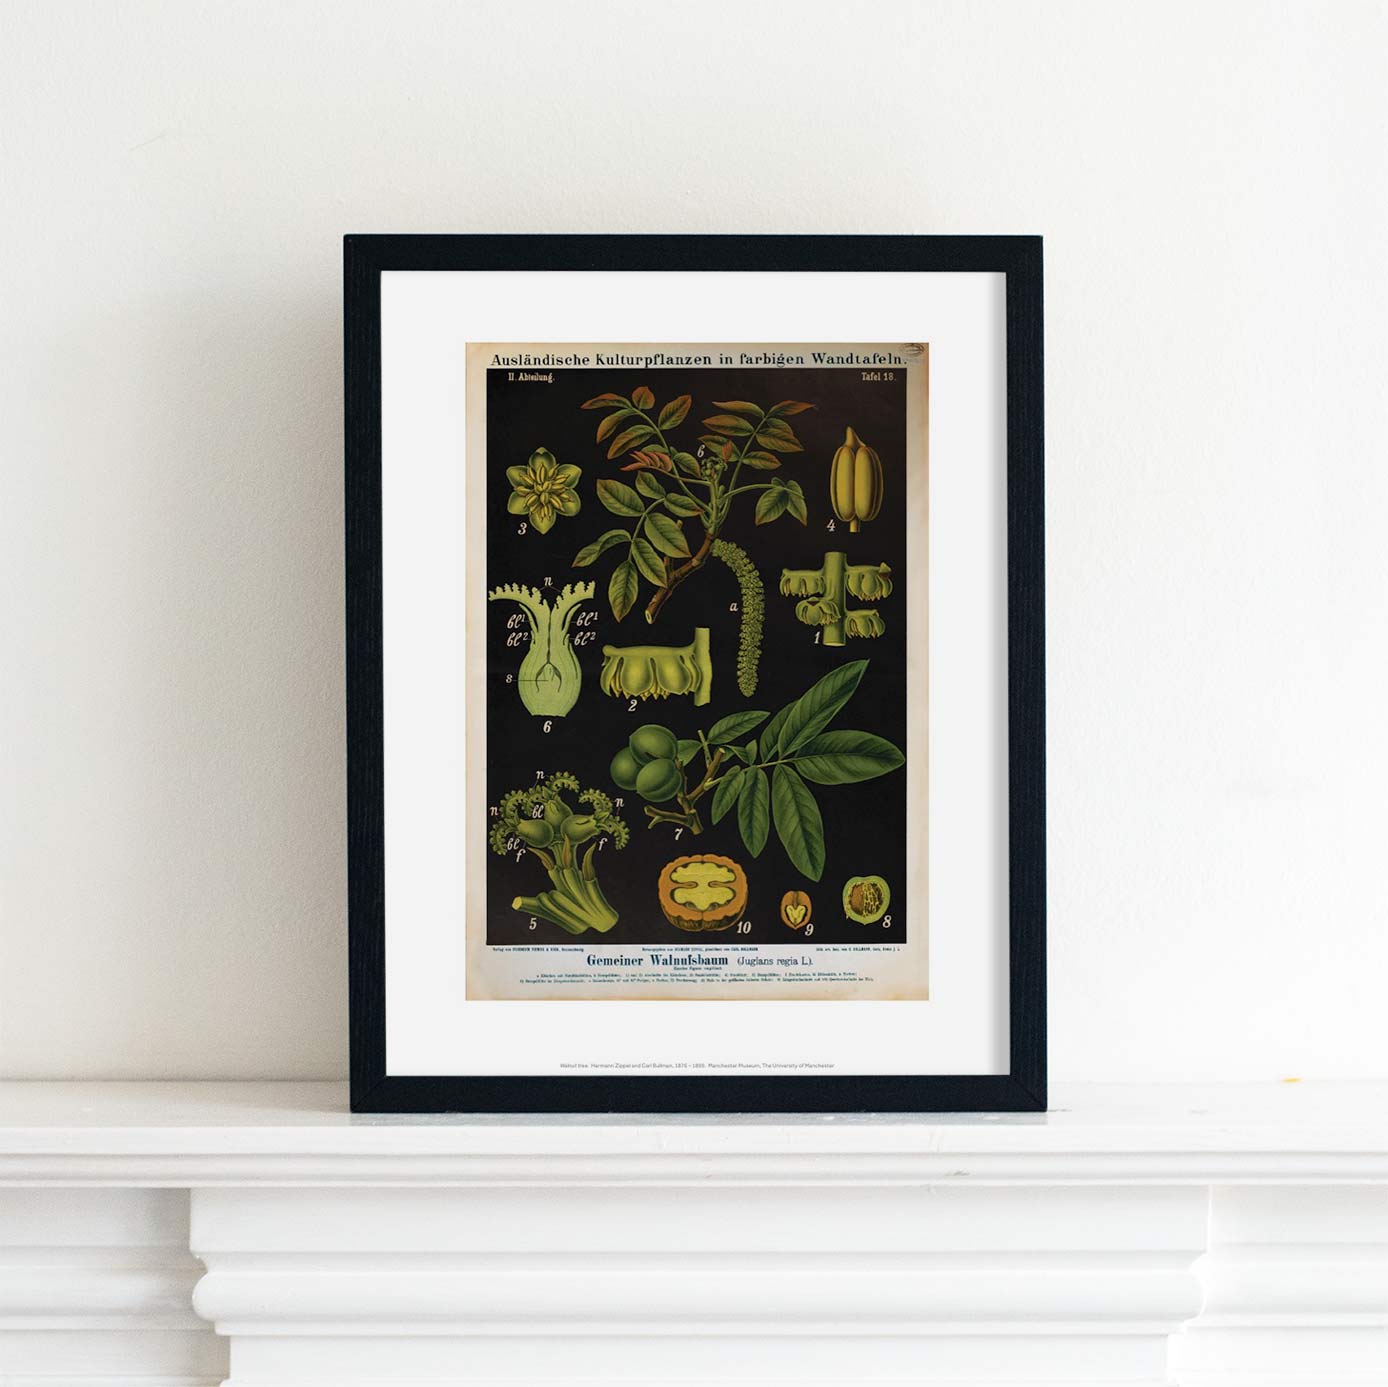 Lifestyle photo of a walnut tree in a black frame and places on a white ledge.